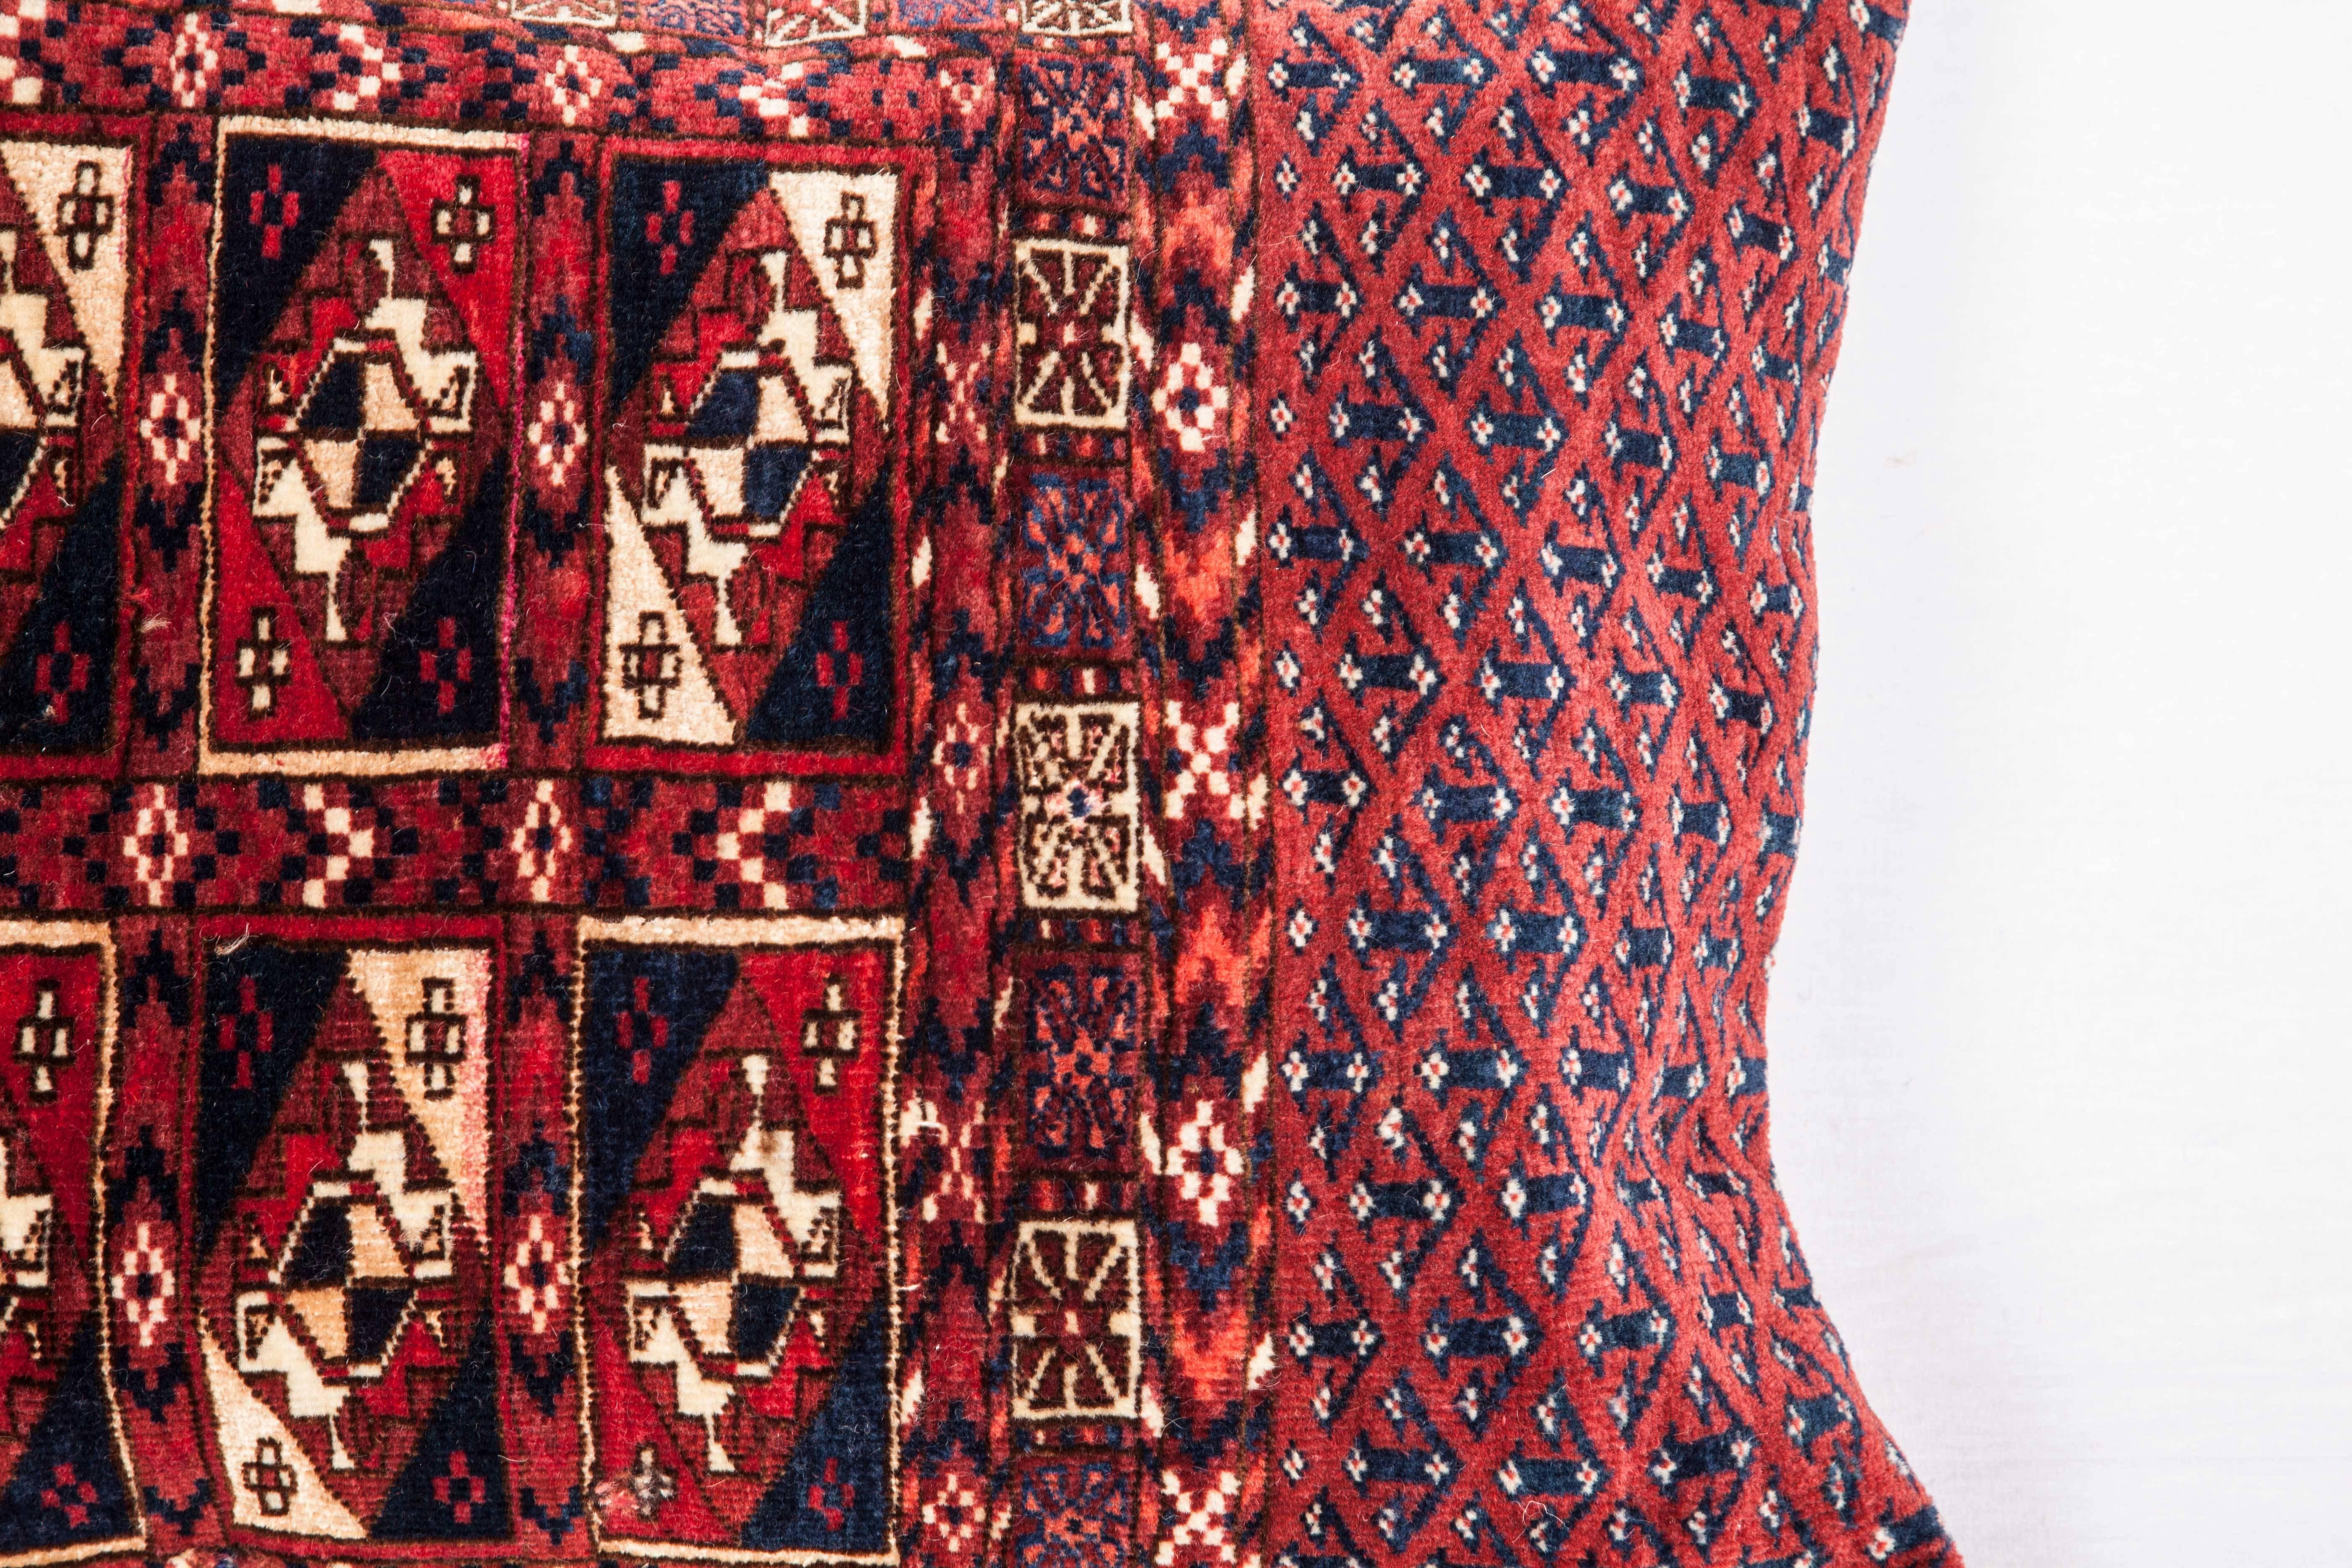 The pillow is made out of a late 19th century, Turkmen Tekke Chuval (storage bag). It has silk highlights. It does not come with an insert but it comes with a bag made to the size and out of cotton to accommodate the filling. The backing is made of